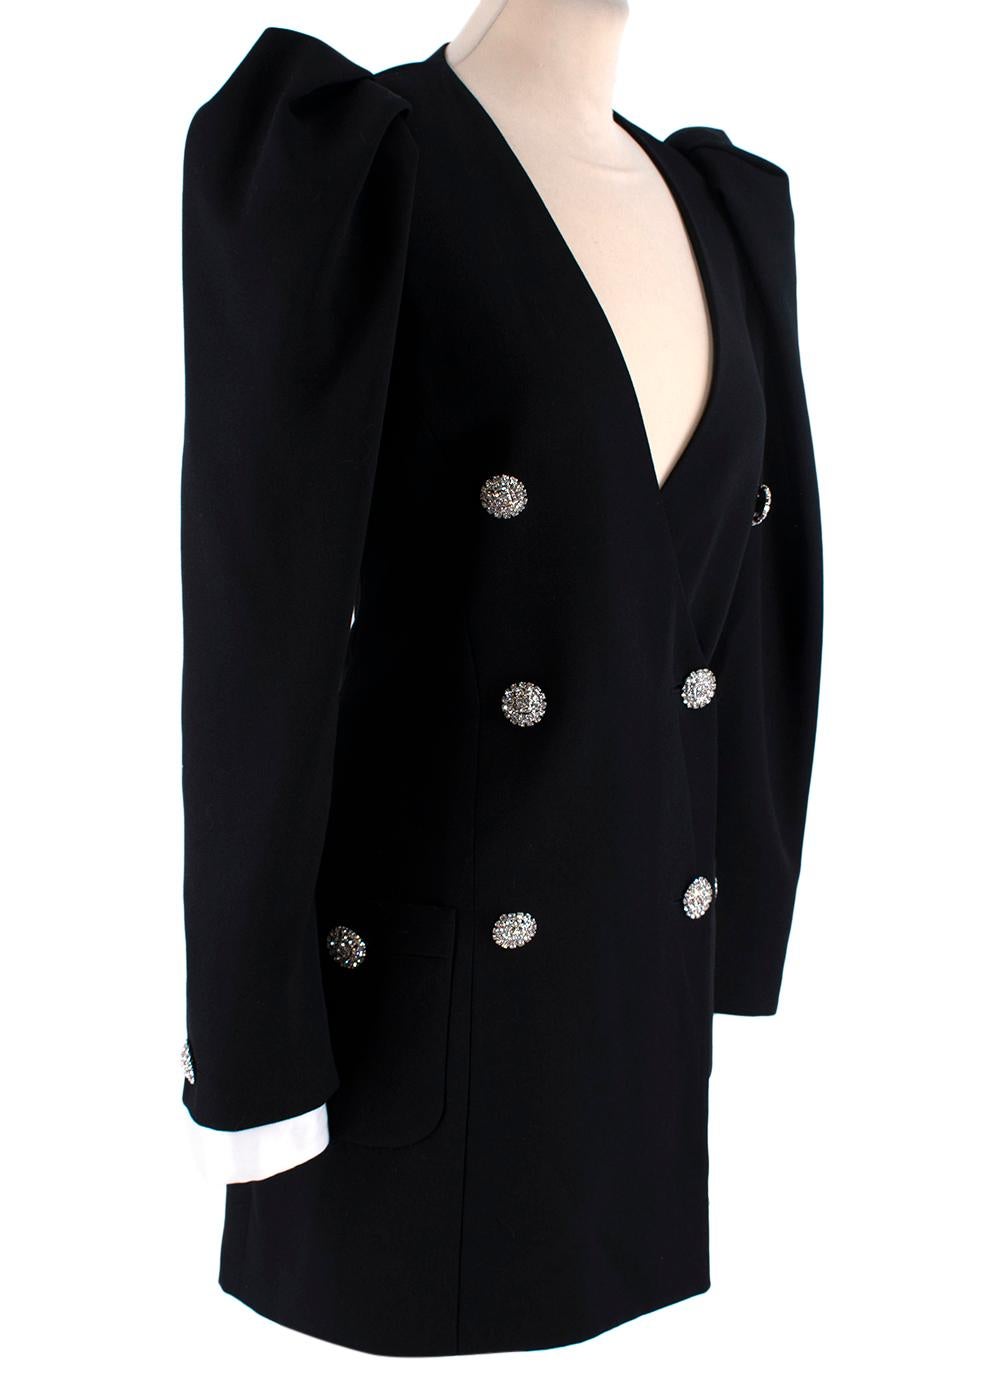 Alessandra Rich Puff Shoulder Double Breasted Mini Jacket Dress	

- Co-blended limited edition created with LuisaViaRoma
- Can be worn as a jacket or dress
- Double breasted button closure 
- Button cuffs
- Jewelled buttons
- One breast pocket
- Two